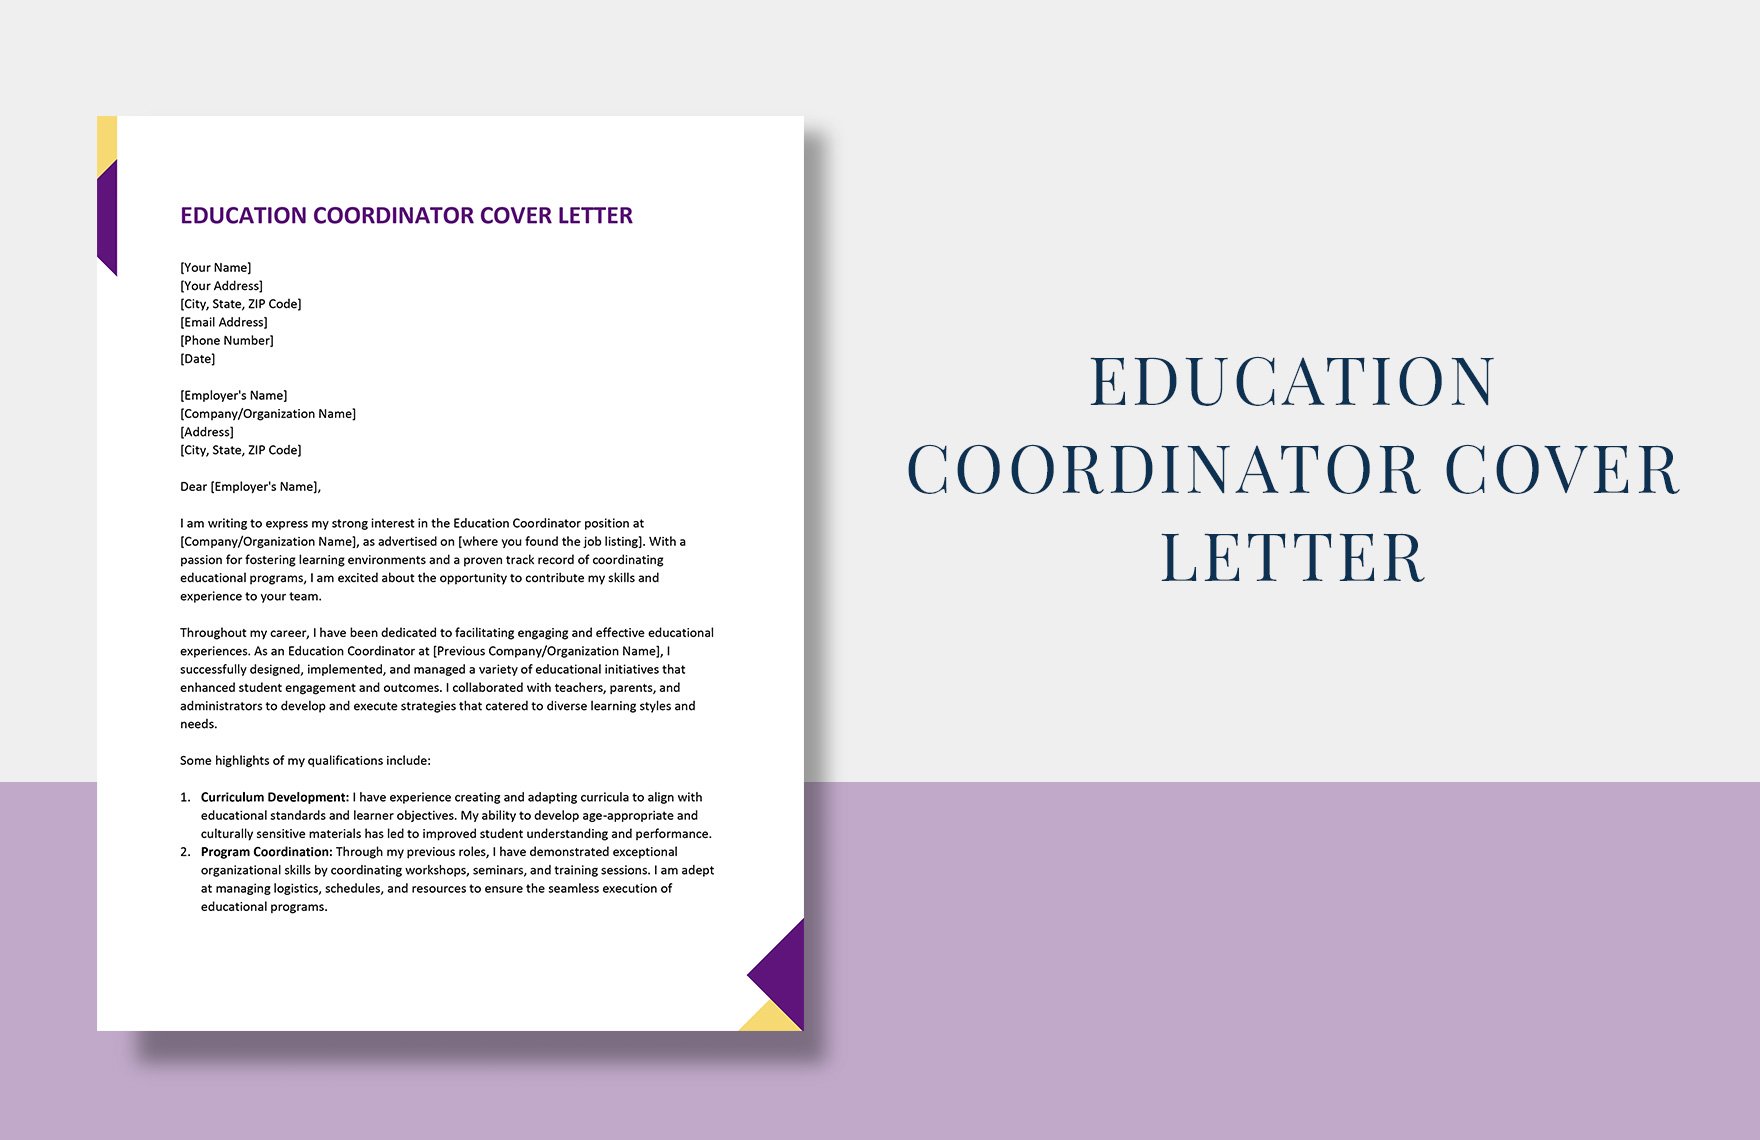 Education Coordinator Cover Letter in Word, Google Docs, Apple Pages